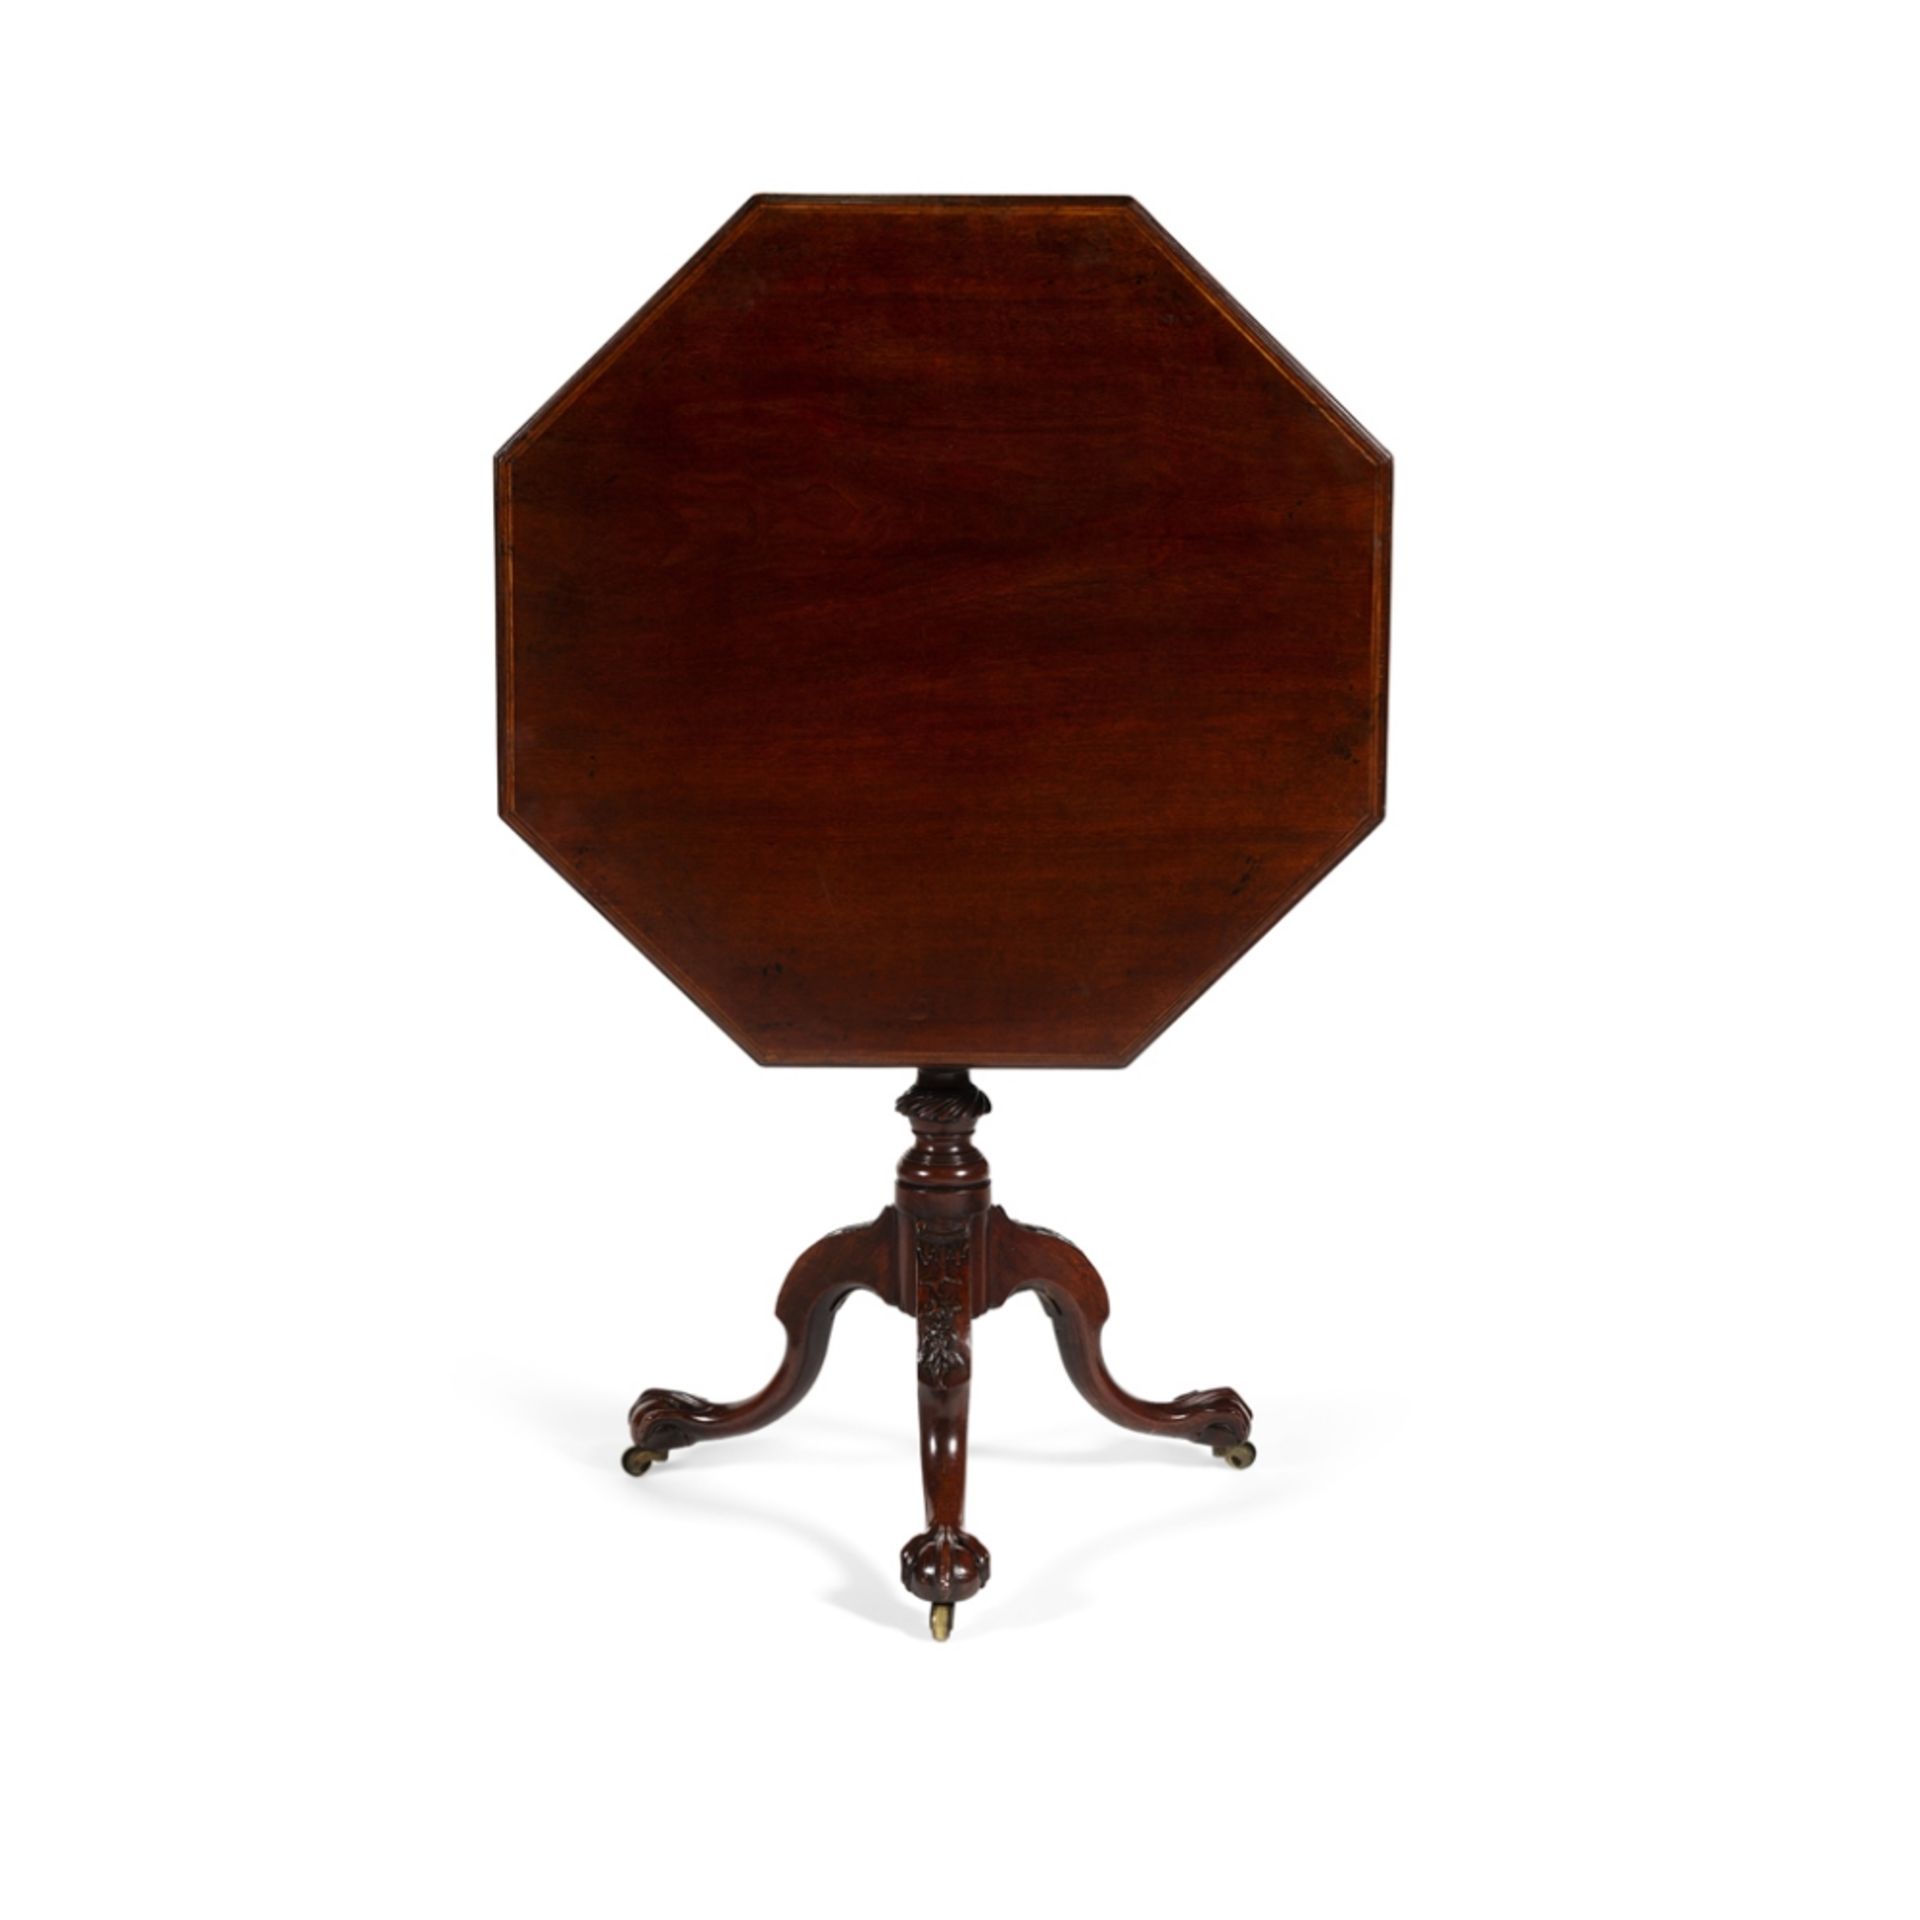 GEORGE III MAHOGANY OCTAGONAL BIRDCAGE TRIPOD TABLE18TH CENTURY the octagonal top with a stringing - Image 2 of 2